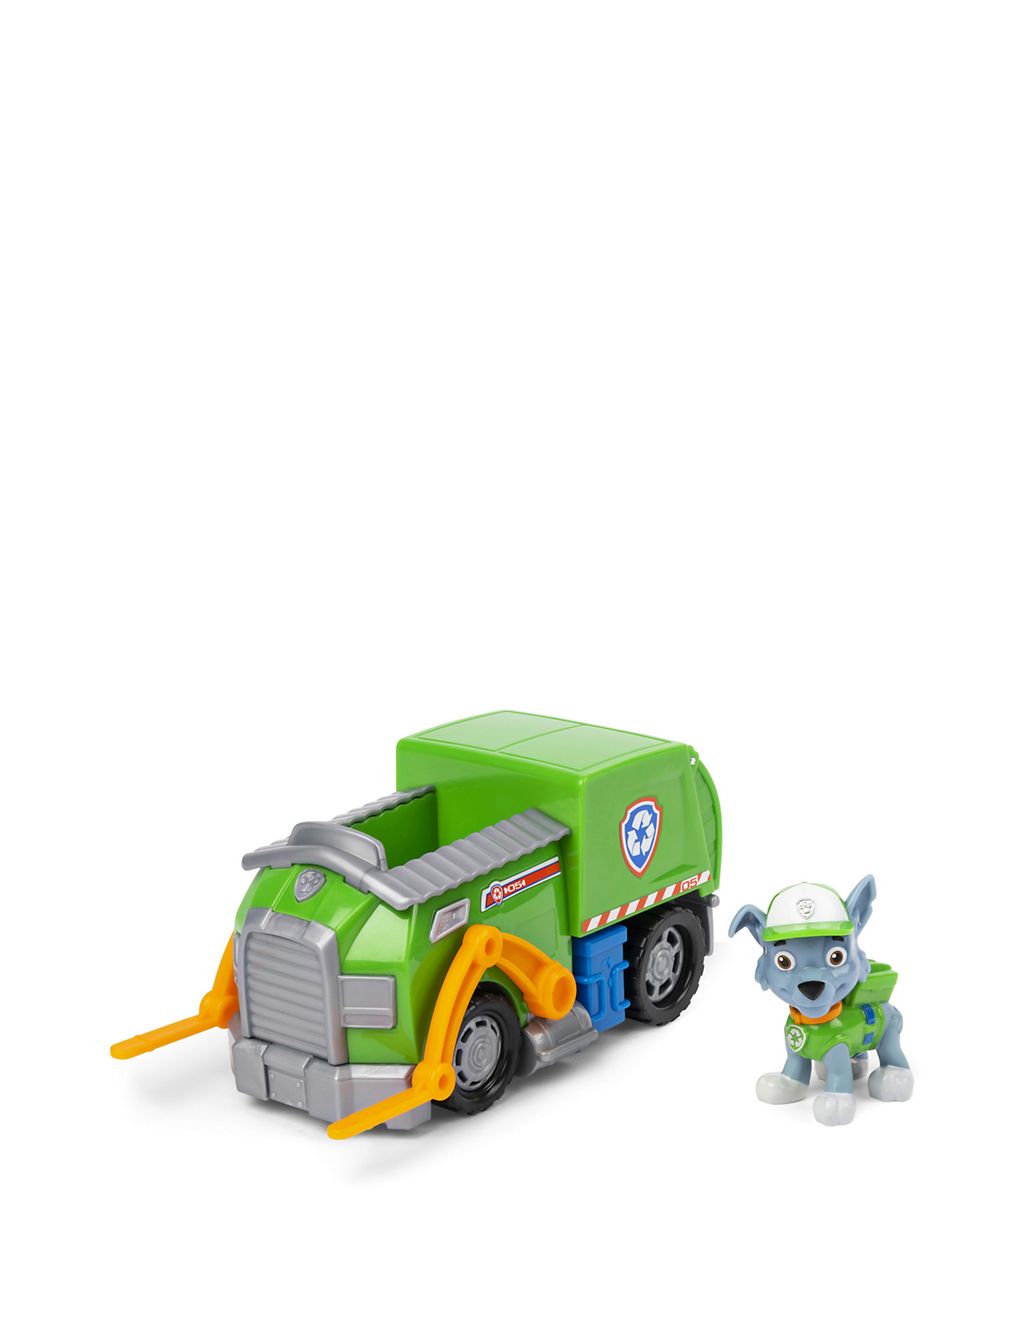 PAW Patrol™ Rocky Recycle Truck (3+ Yrs) 1 of 4